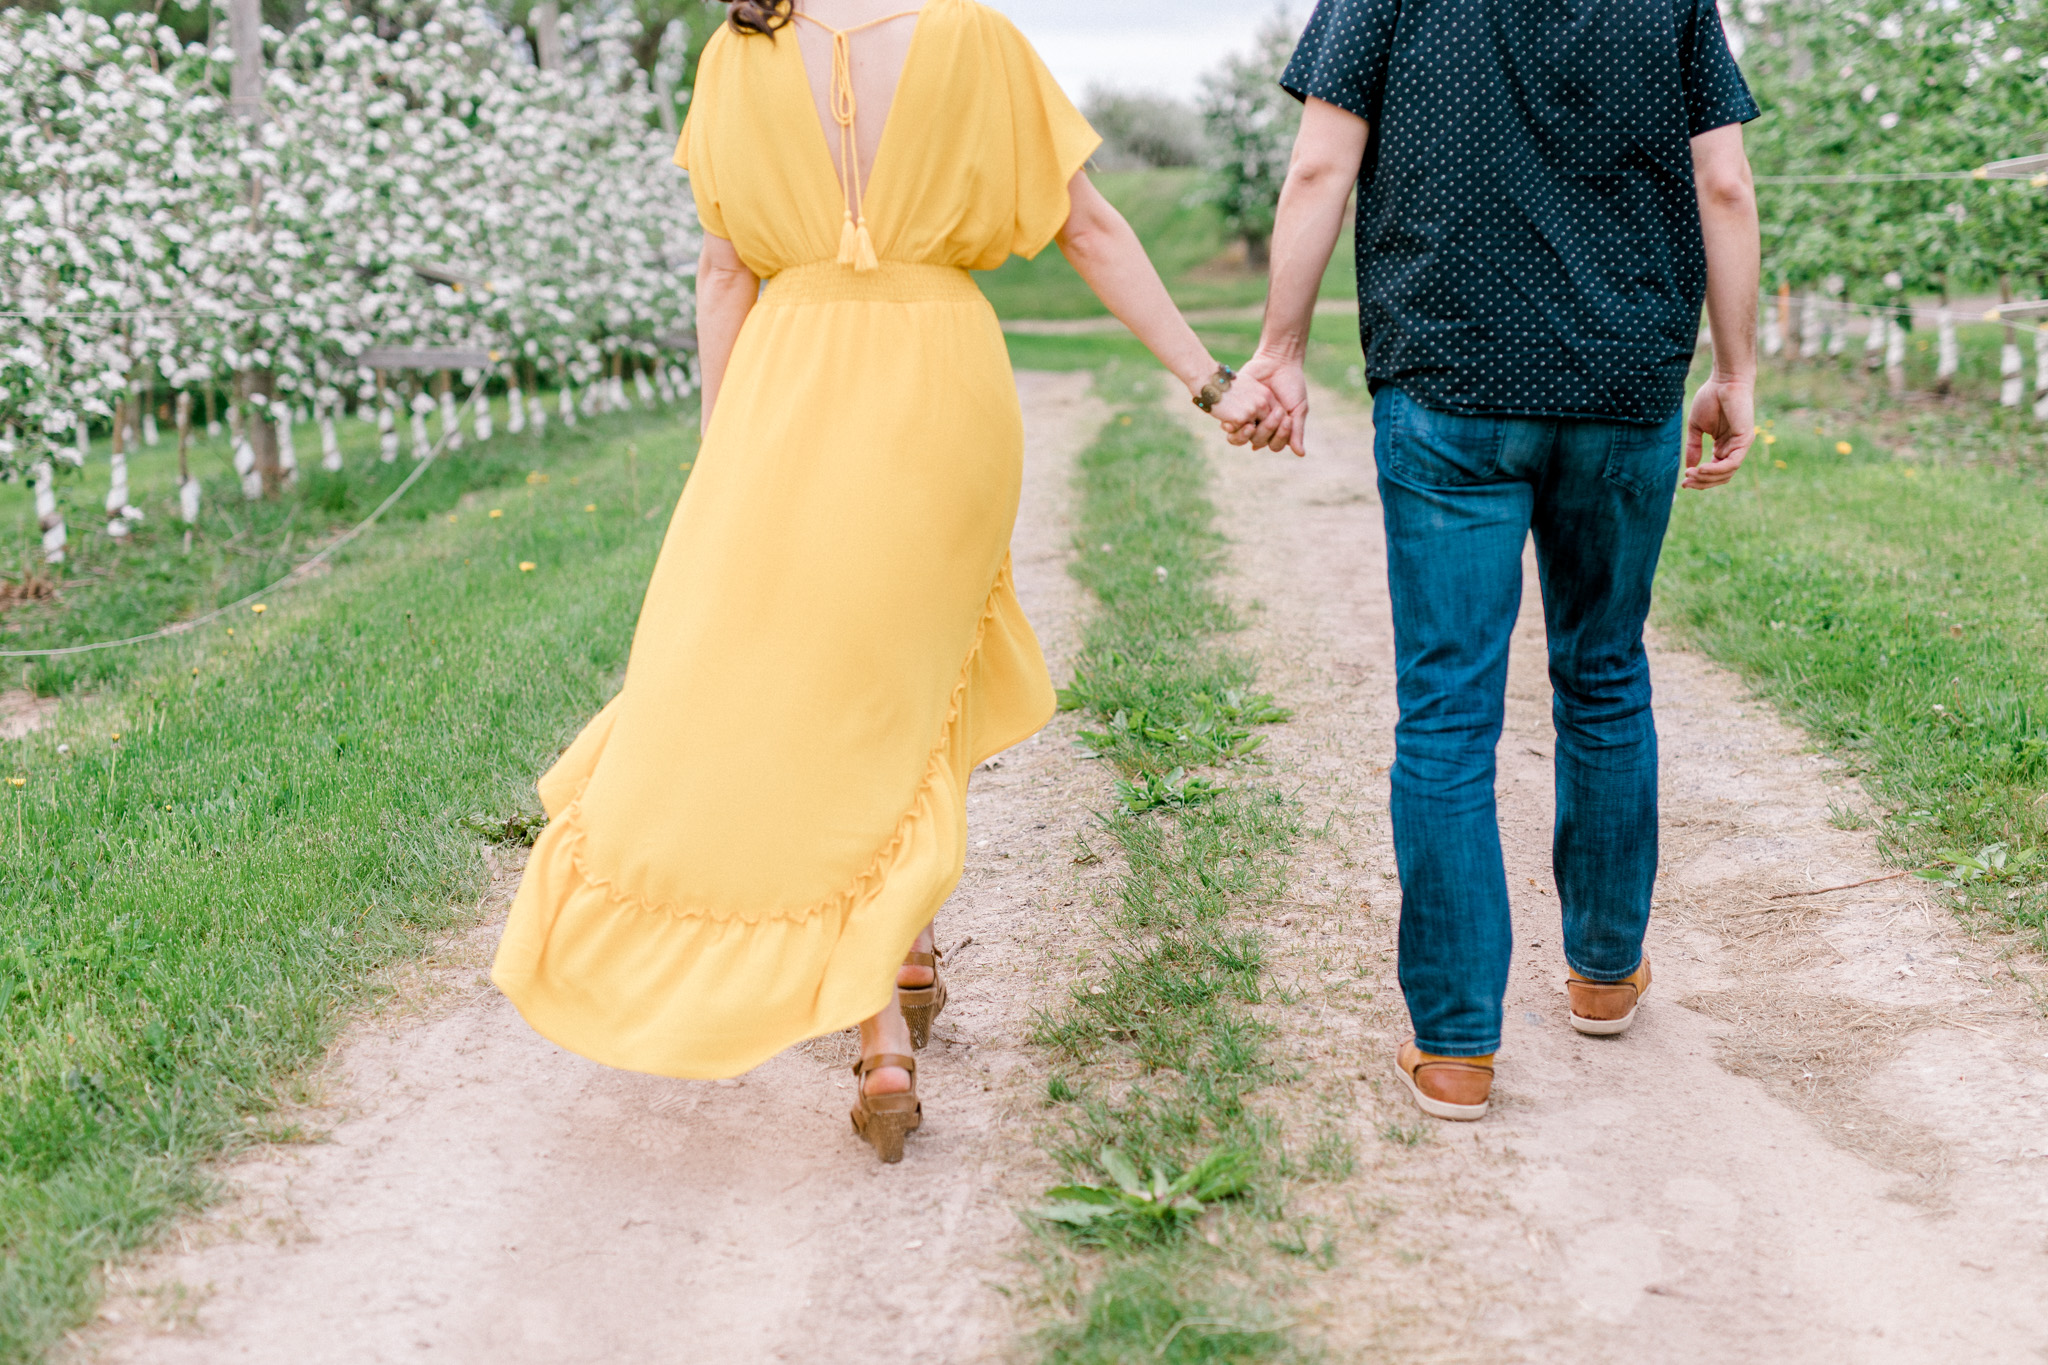 Spring Apple Blossom Engagement Session at the Orchard | Engagement Bouquet | Mustard Yellow Dress | What to Wear to Your Engagement Session | Grand Rapids Wedding Photographer